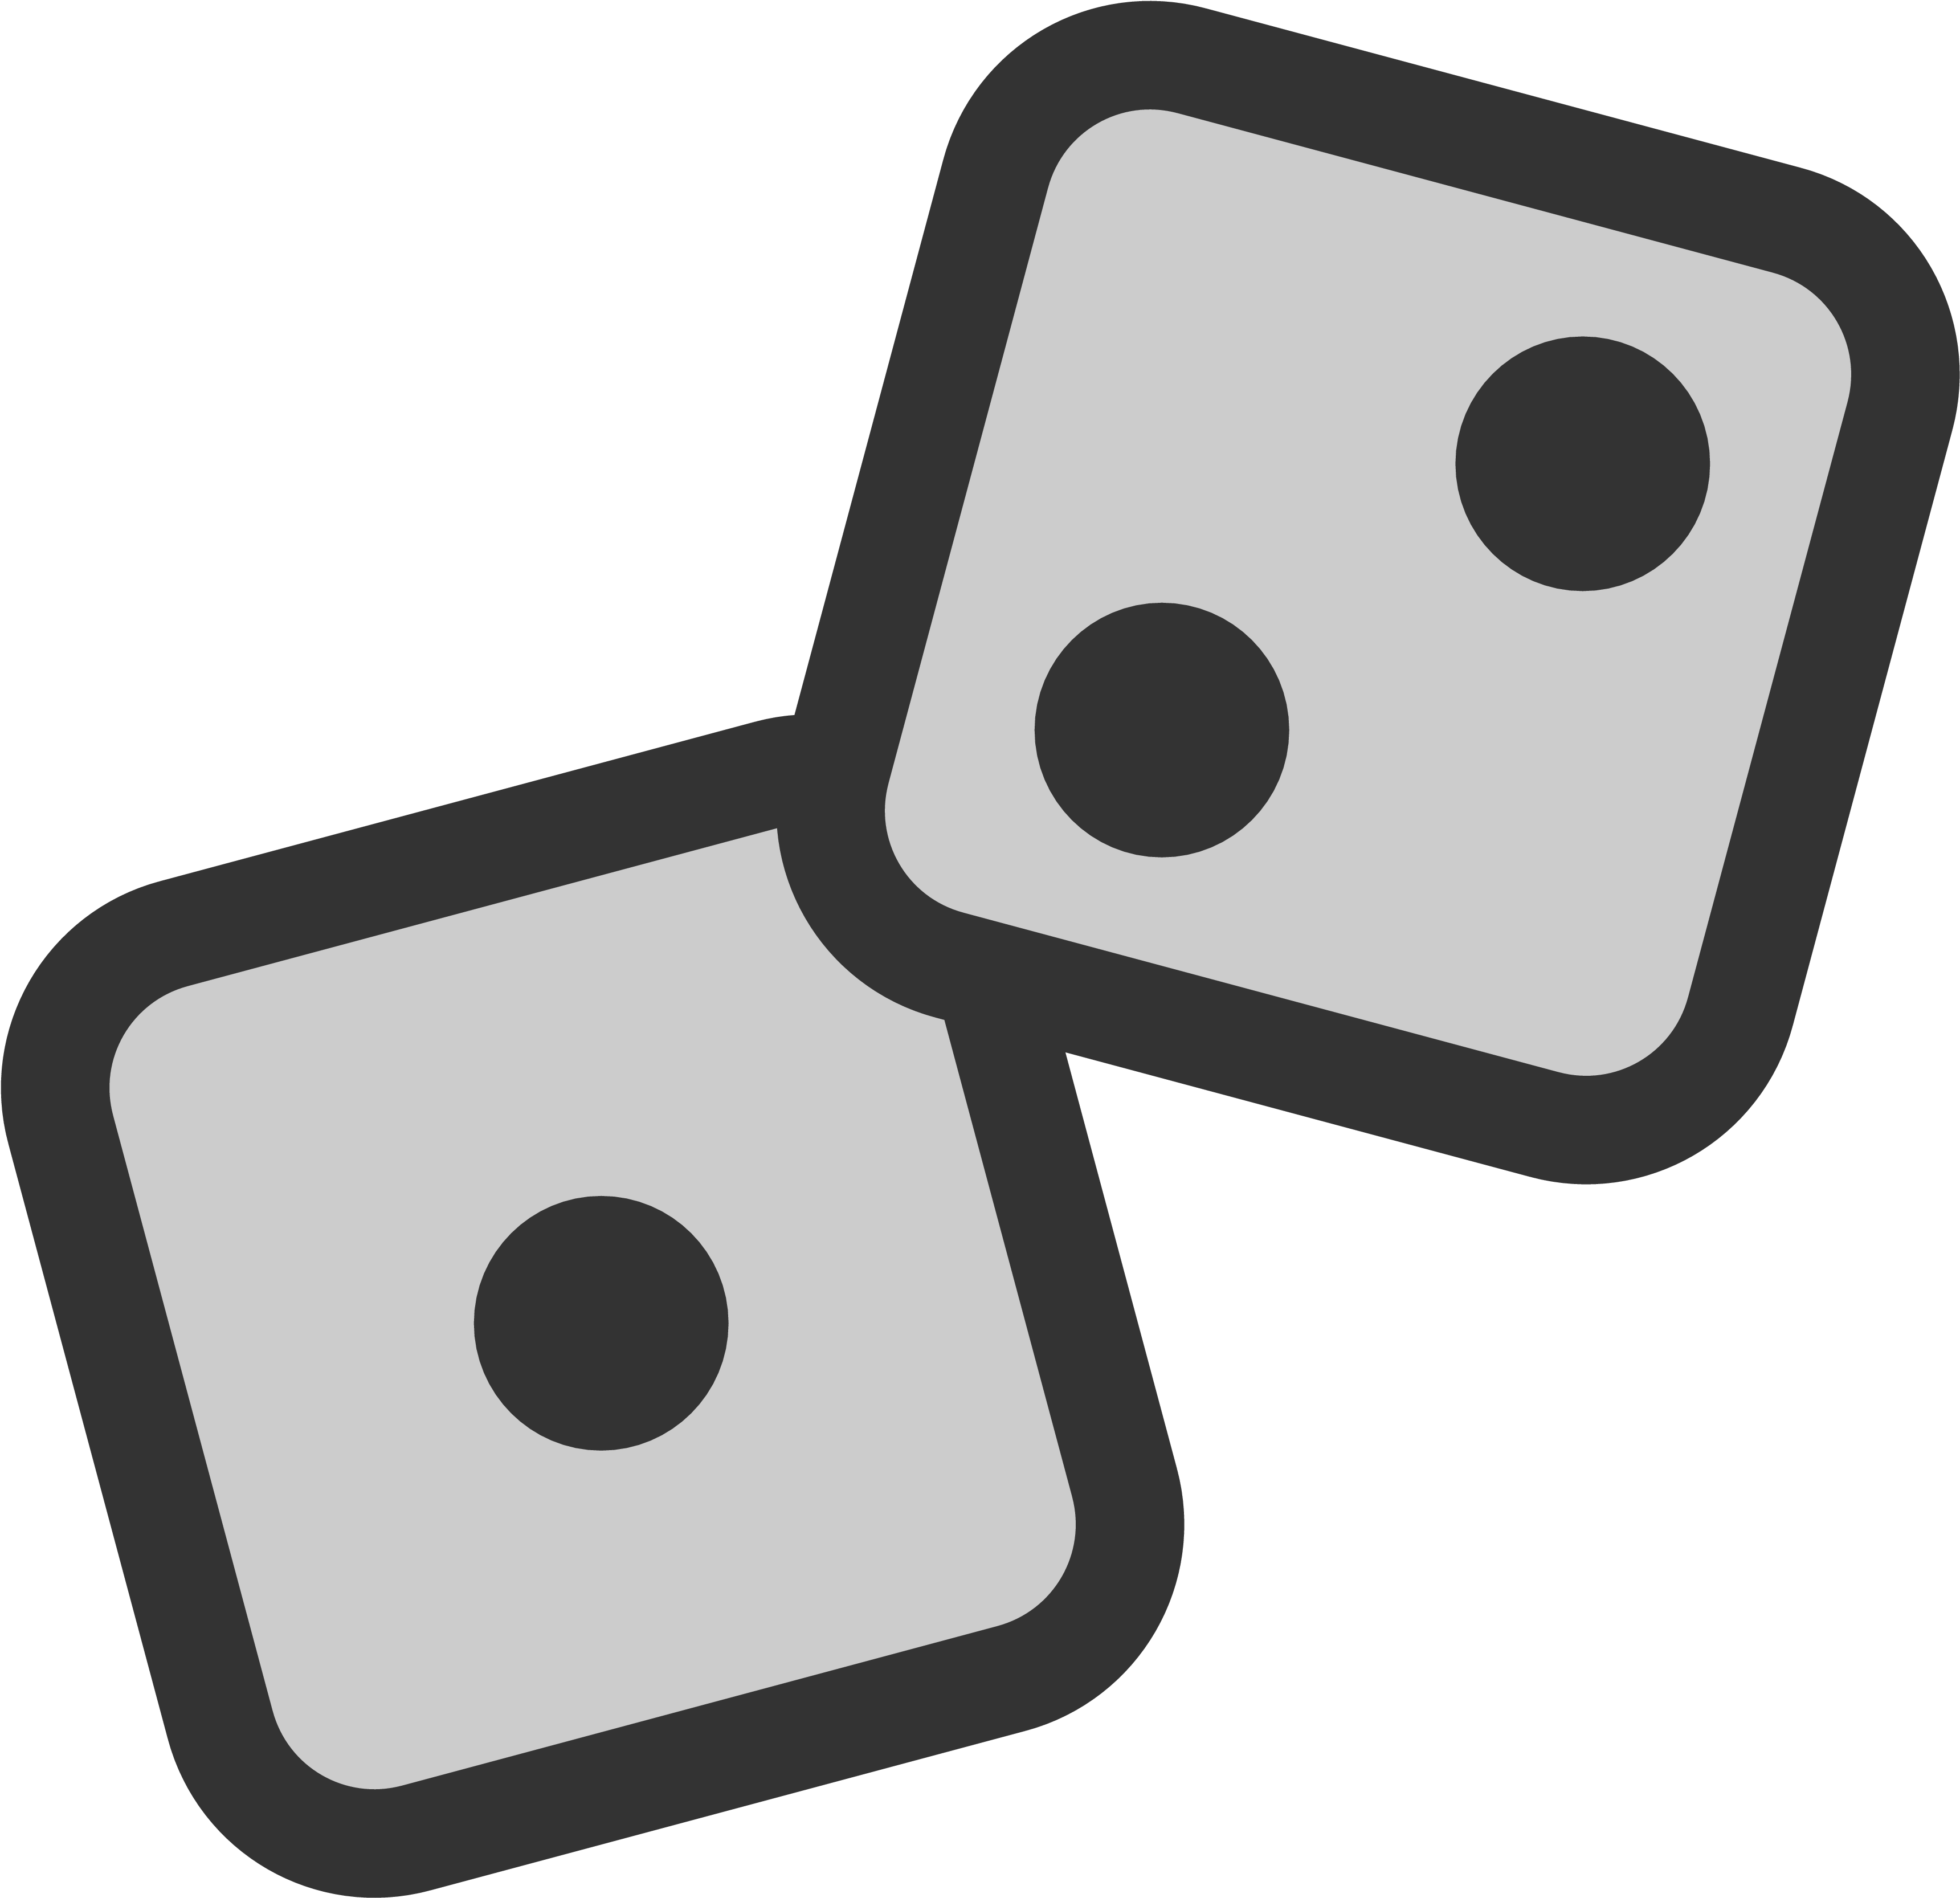 Dcal Board Games - Dice Roll Of 3 (3500x3424)